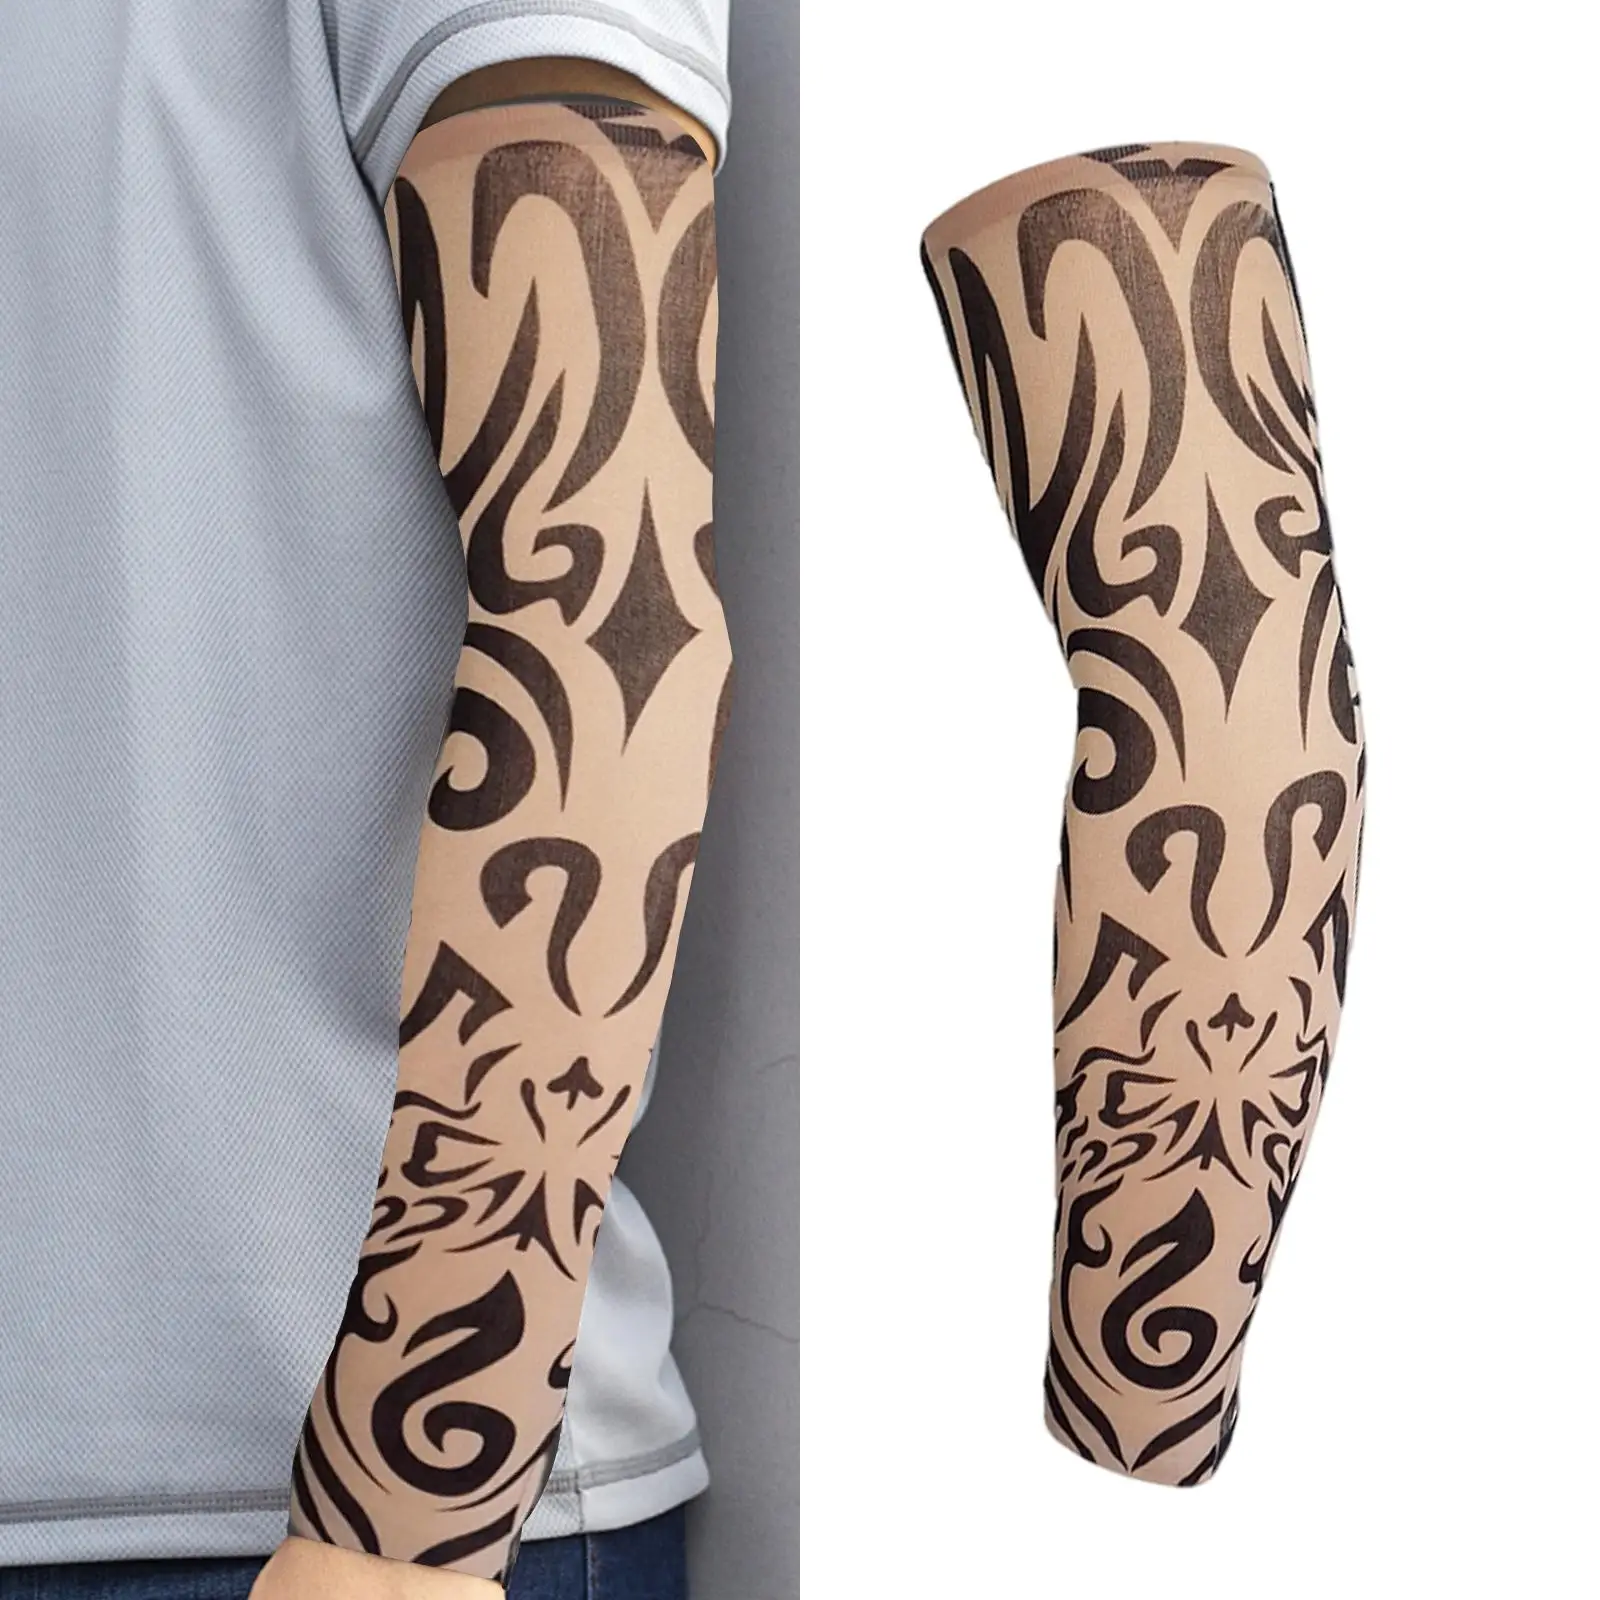 1Pcs Tattoo Arm Sleeves Arm Cover Sun Protection for Golf Outdoor Activities